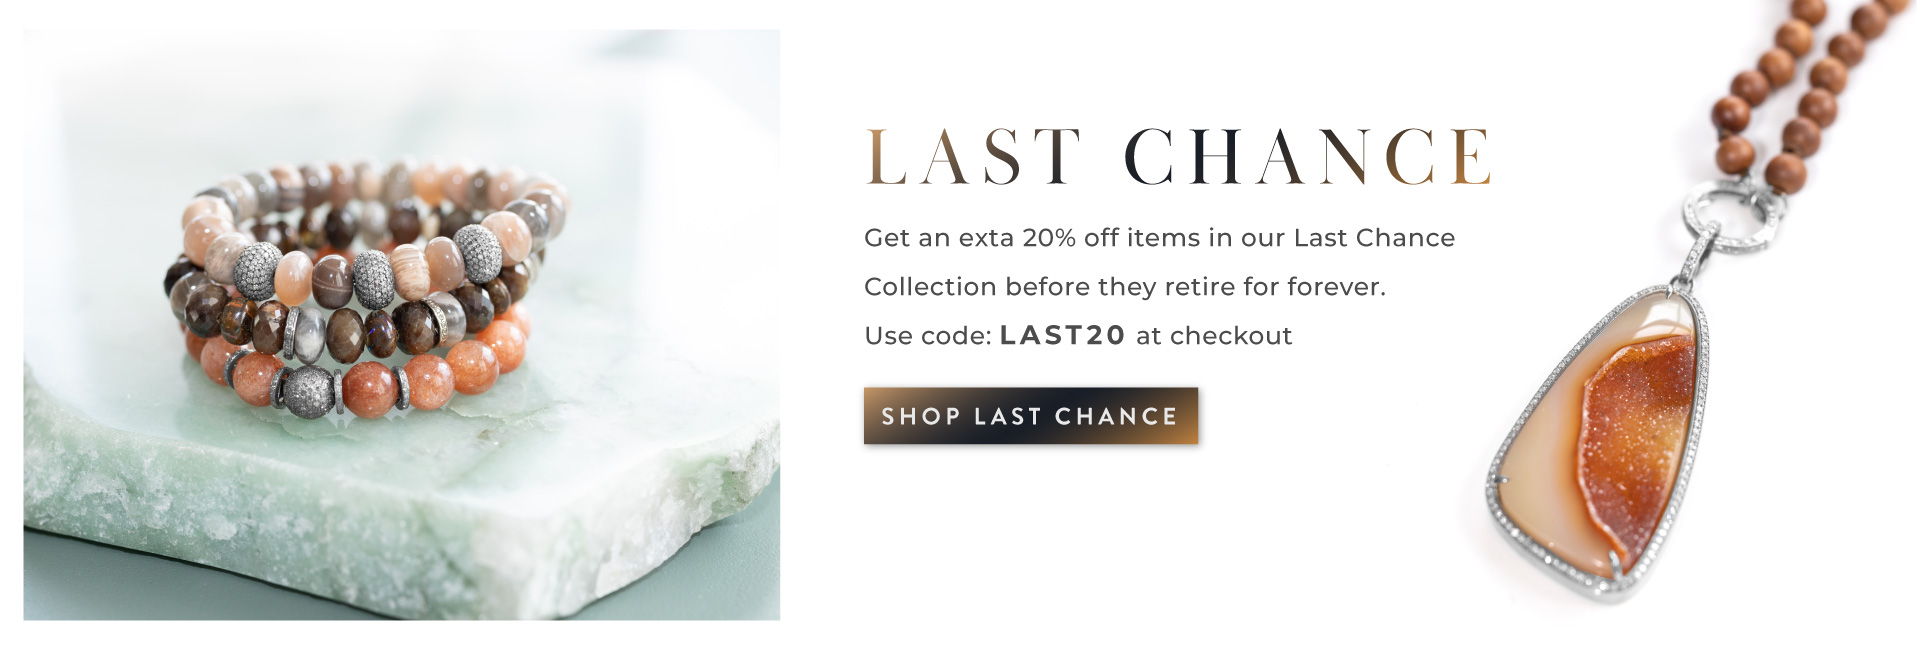 Last Chance Sale - get an extra 20% off sale items - Use code LAST20.